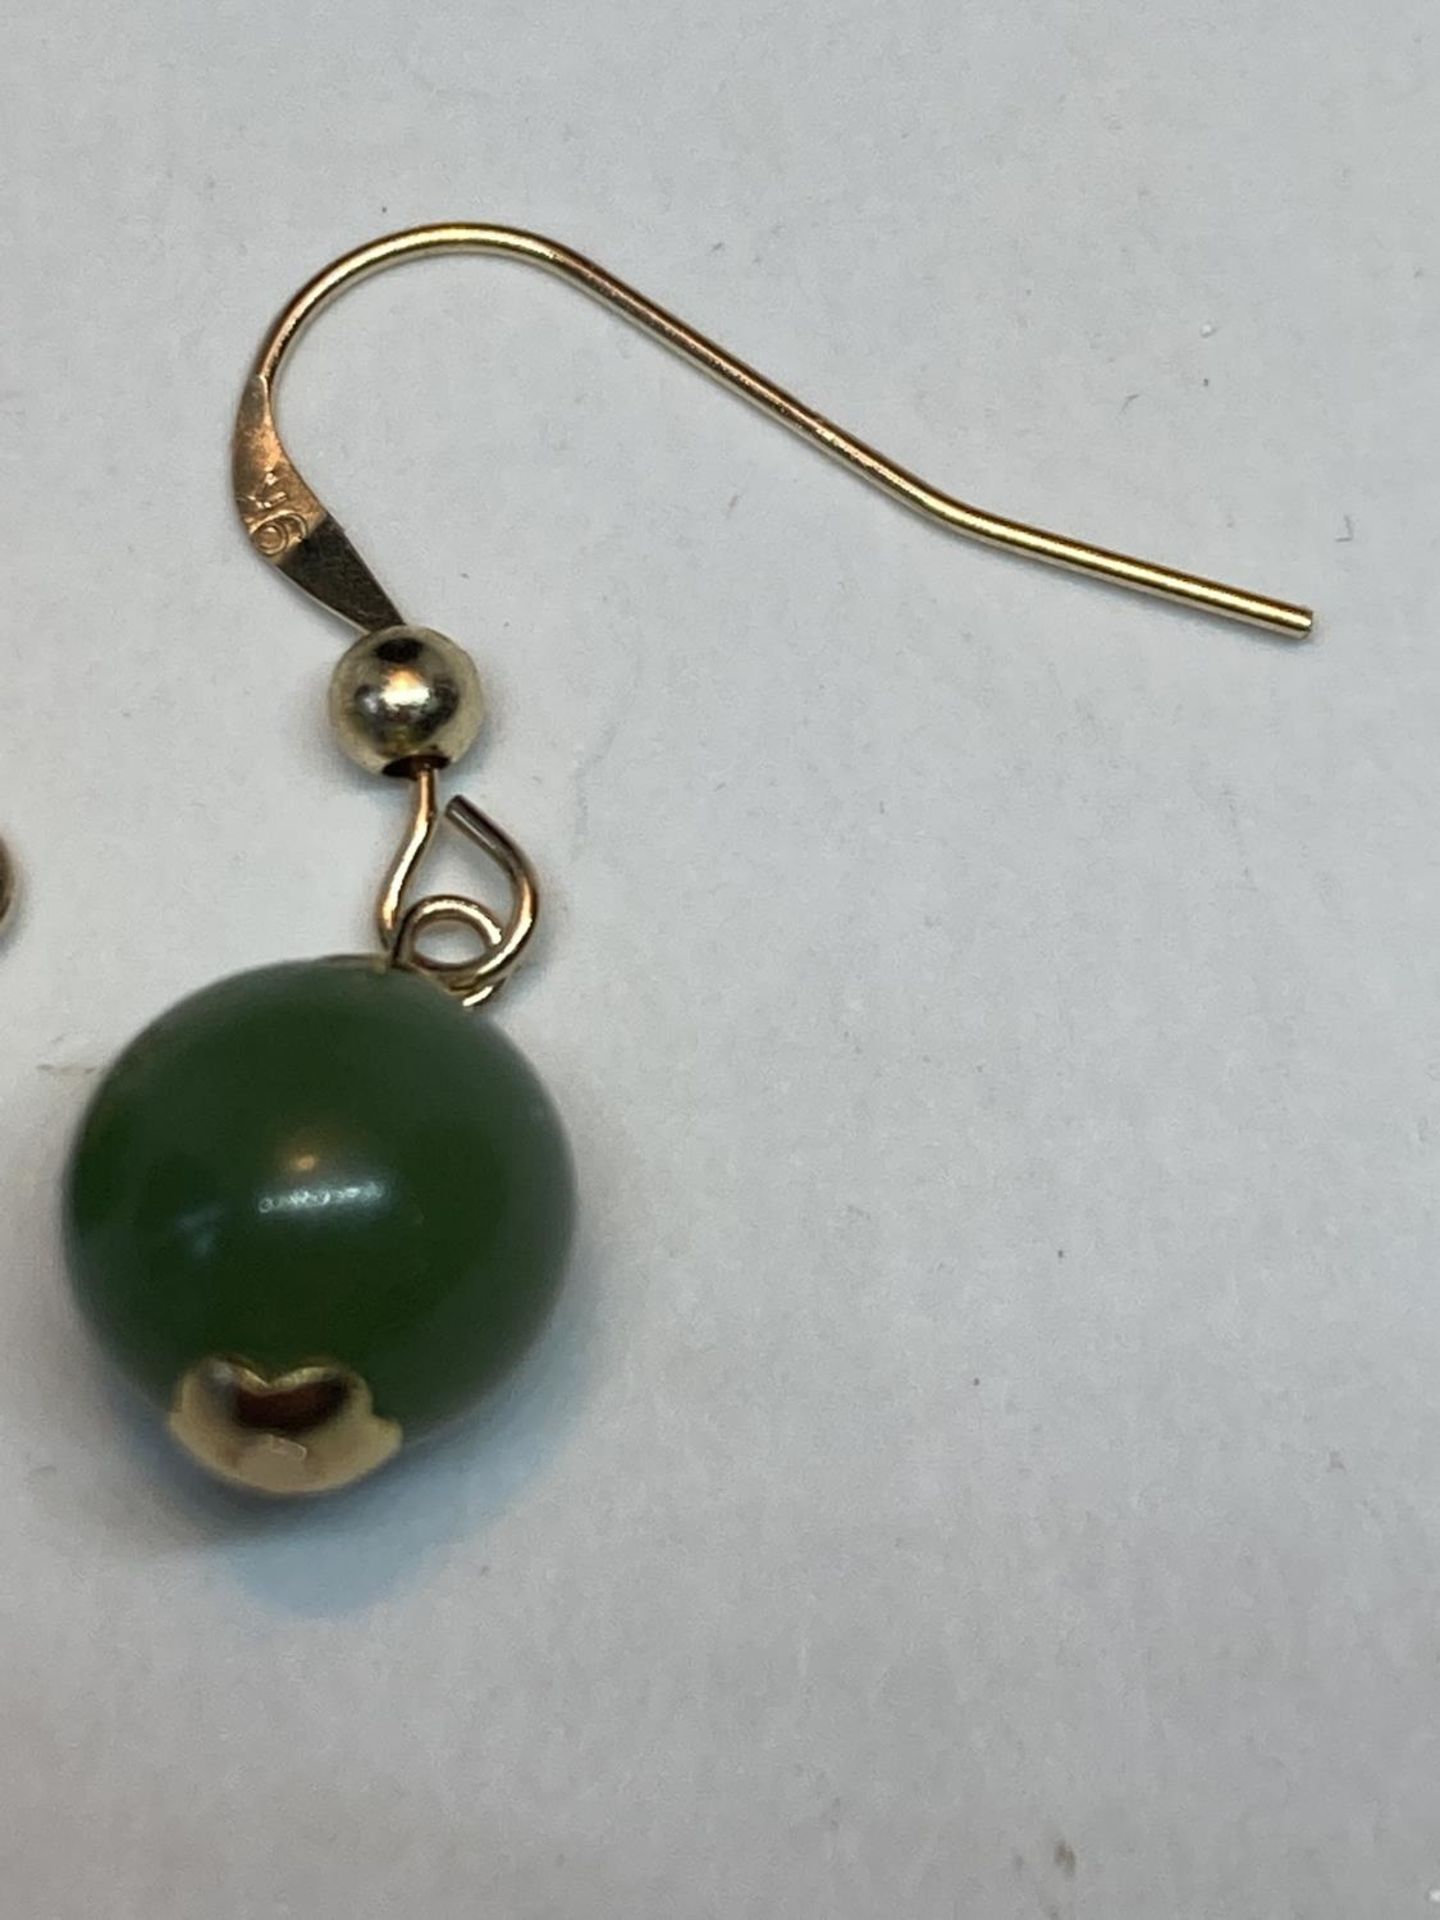 A PAIR OF MARKED 9K EARRINGS WITH GREEN CHALCEDONY STONES - Image 5 of 8